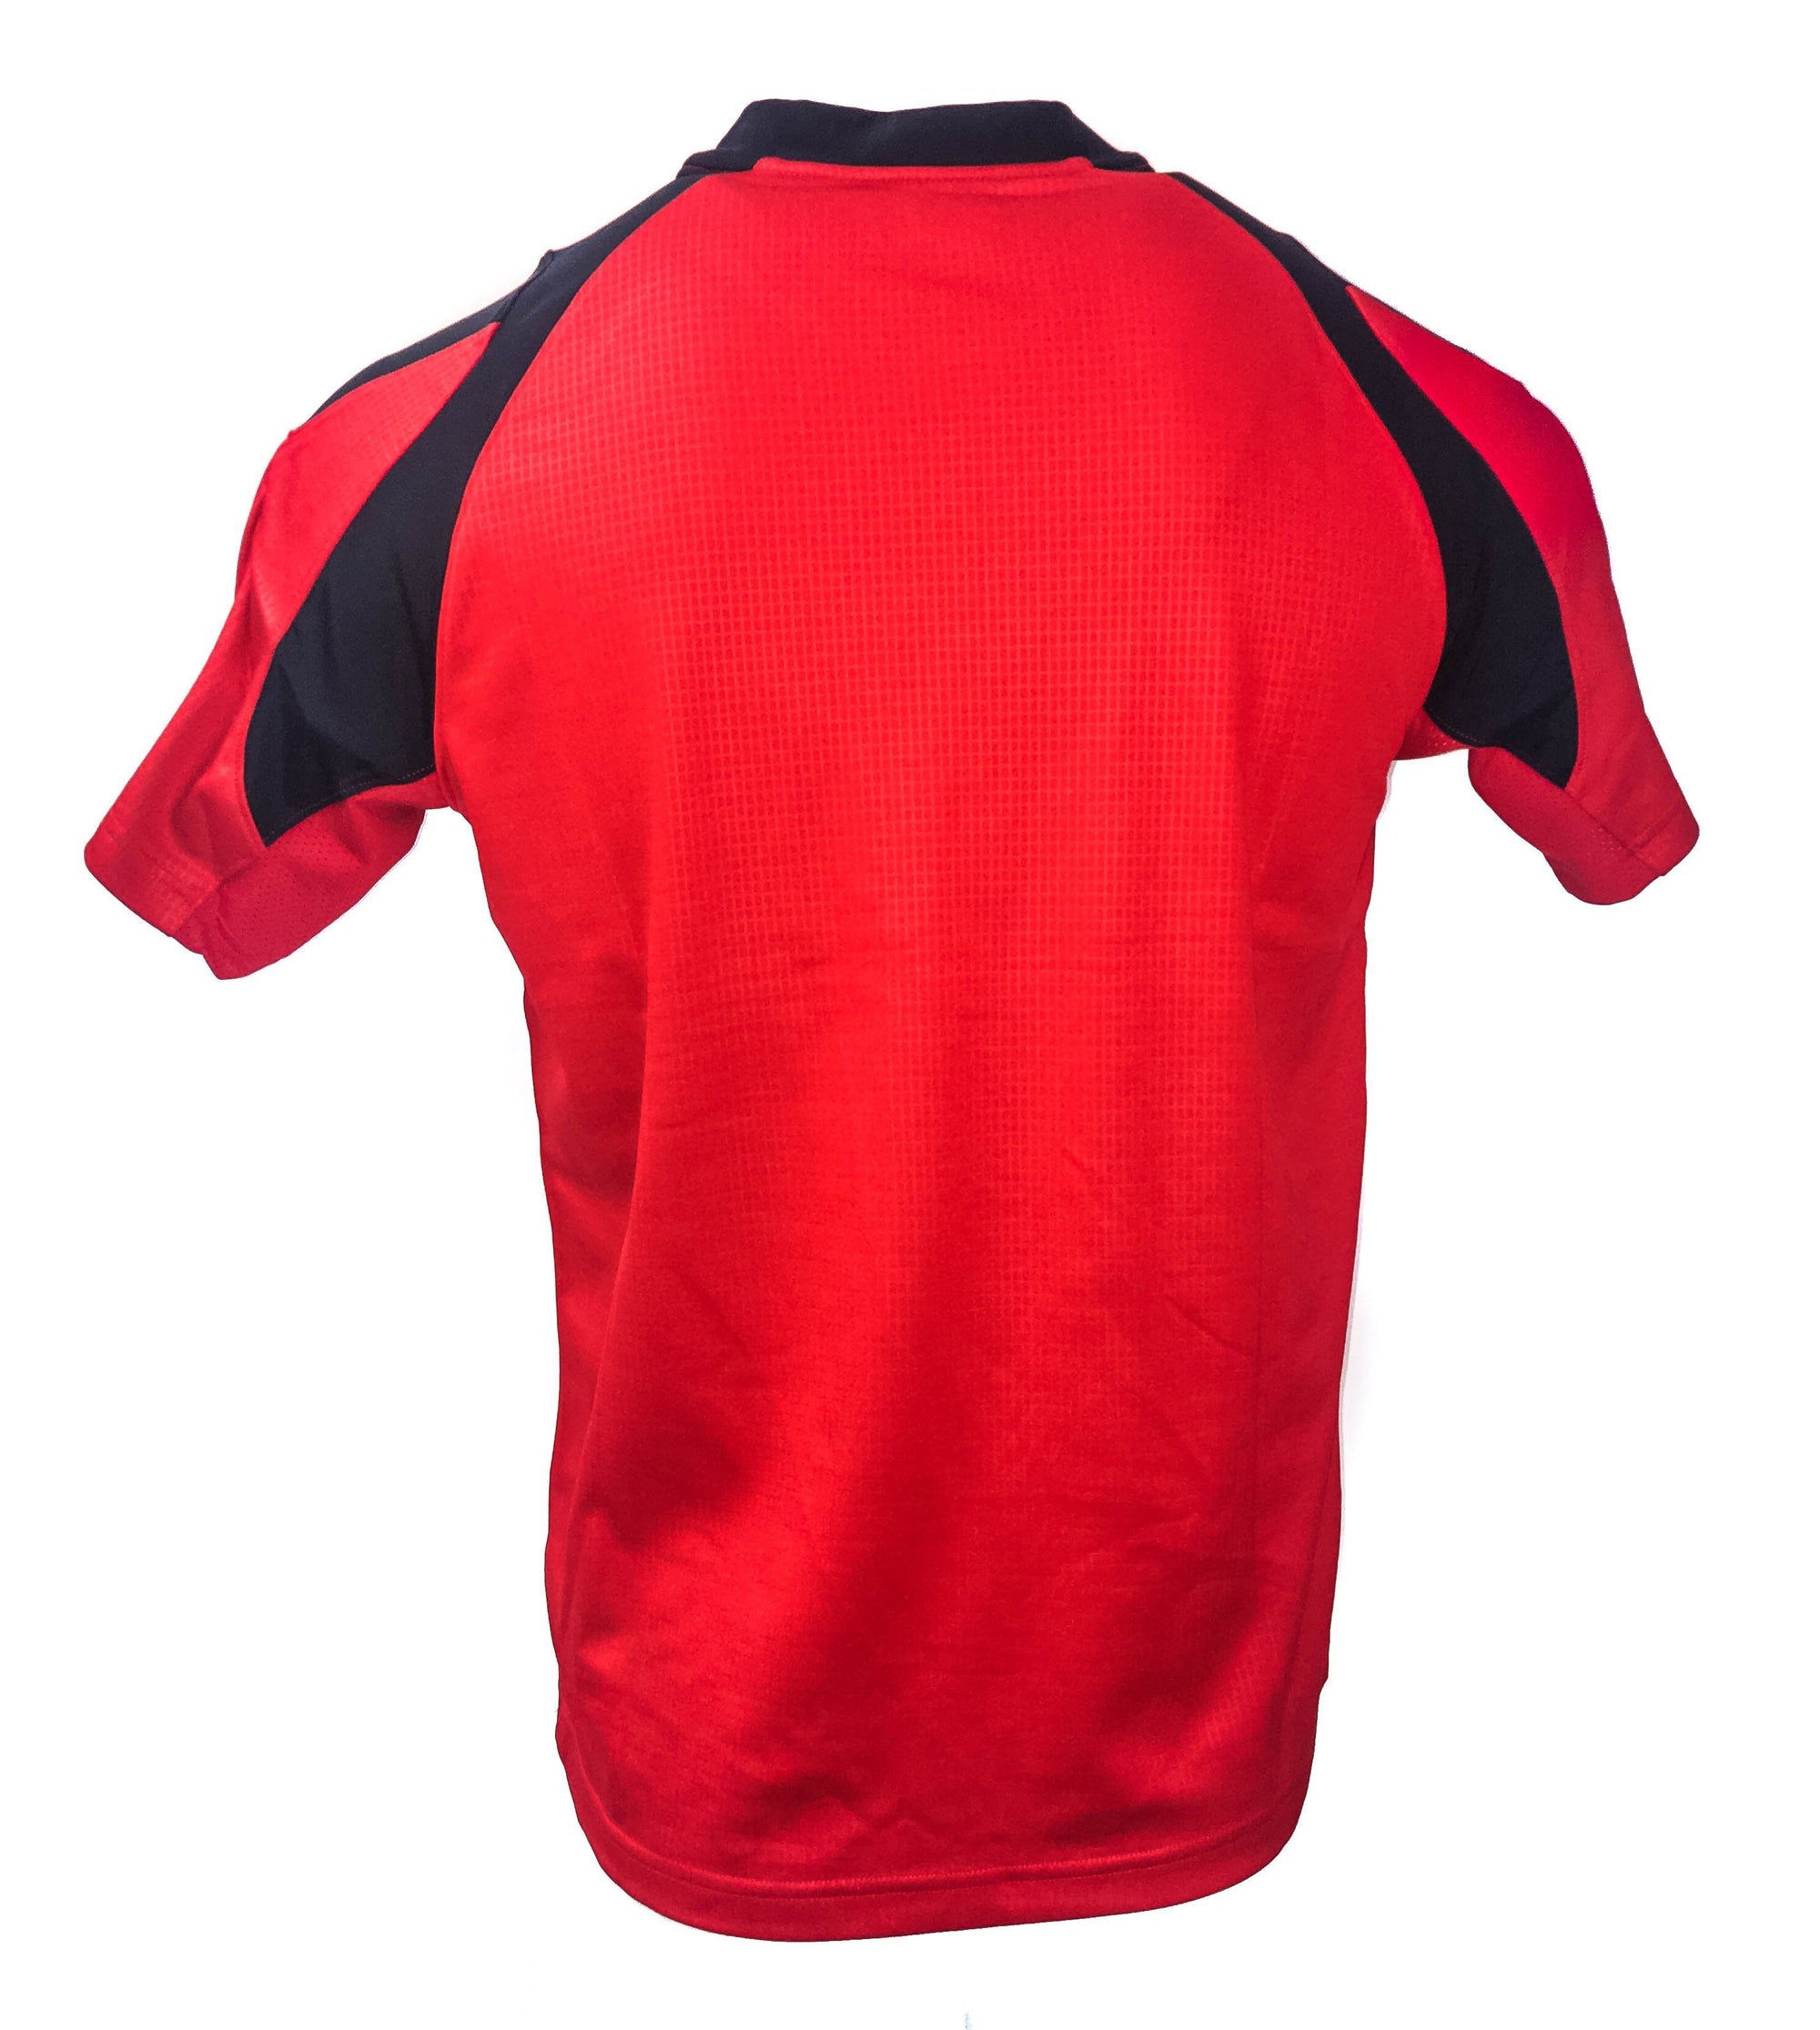 De eigenaar interval Portret Rugby Canada Official Replica Jersey 14/15 Red - Ruggers Rugby Supply